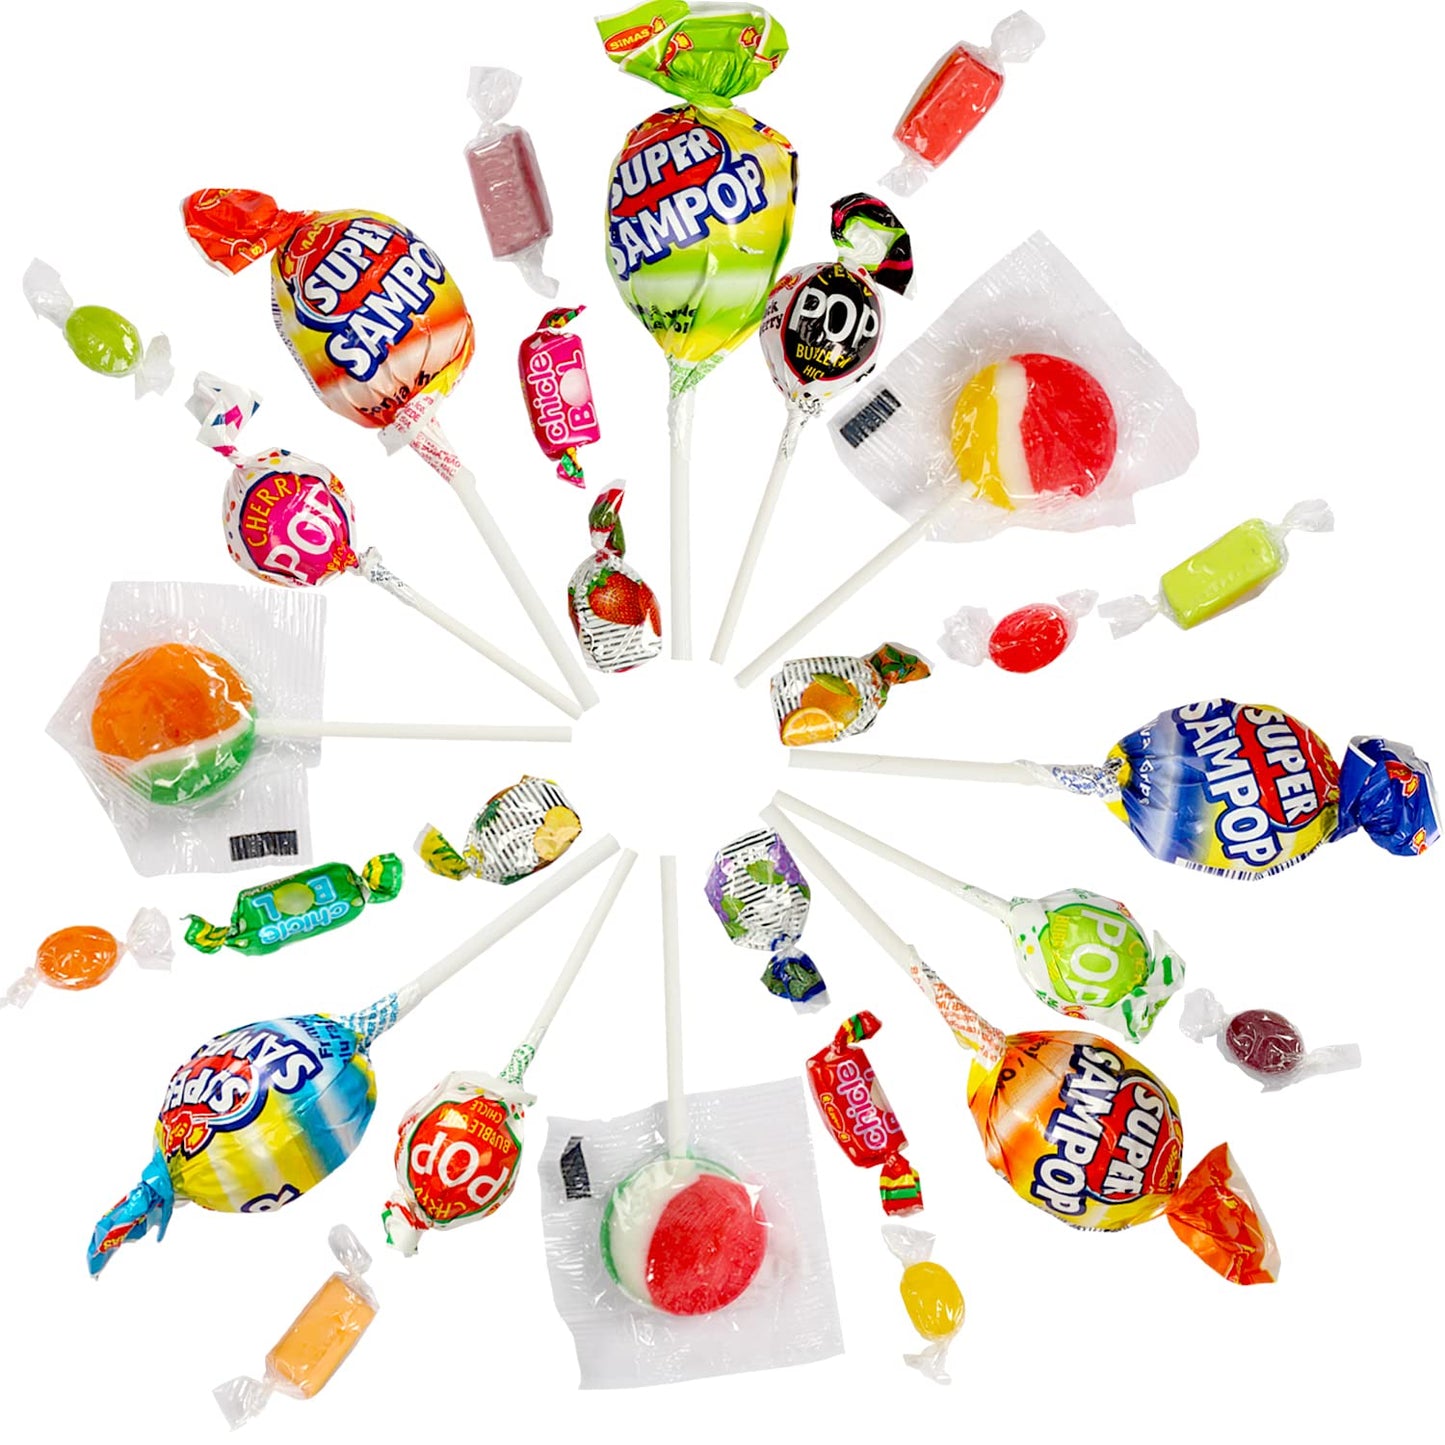 Pinata Candy - 3 LB Bulk Bag - Cinco De Mayo Fiesta Mix - Goody Bag Stuffer Candies - Assorted Lollipops and Candies - Party Variety Pack for Birthdays, Parades, Pinatas and More